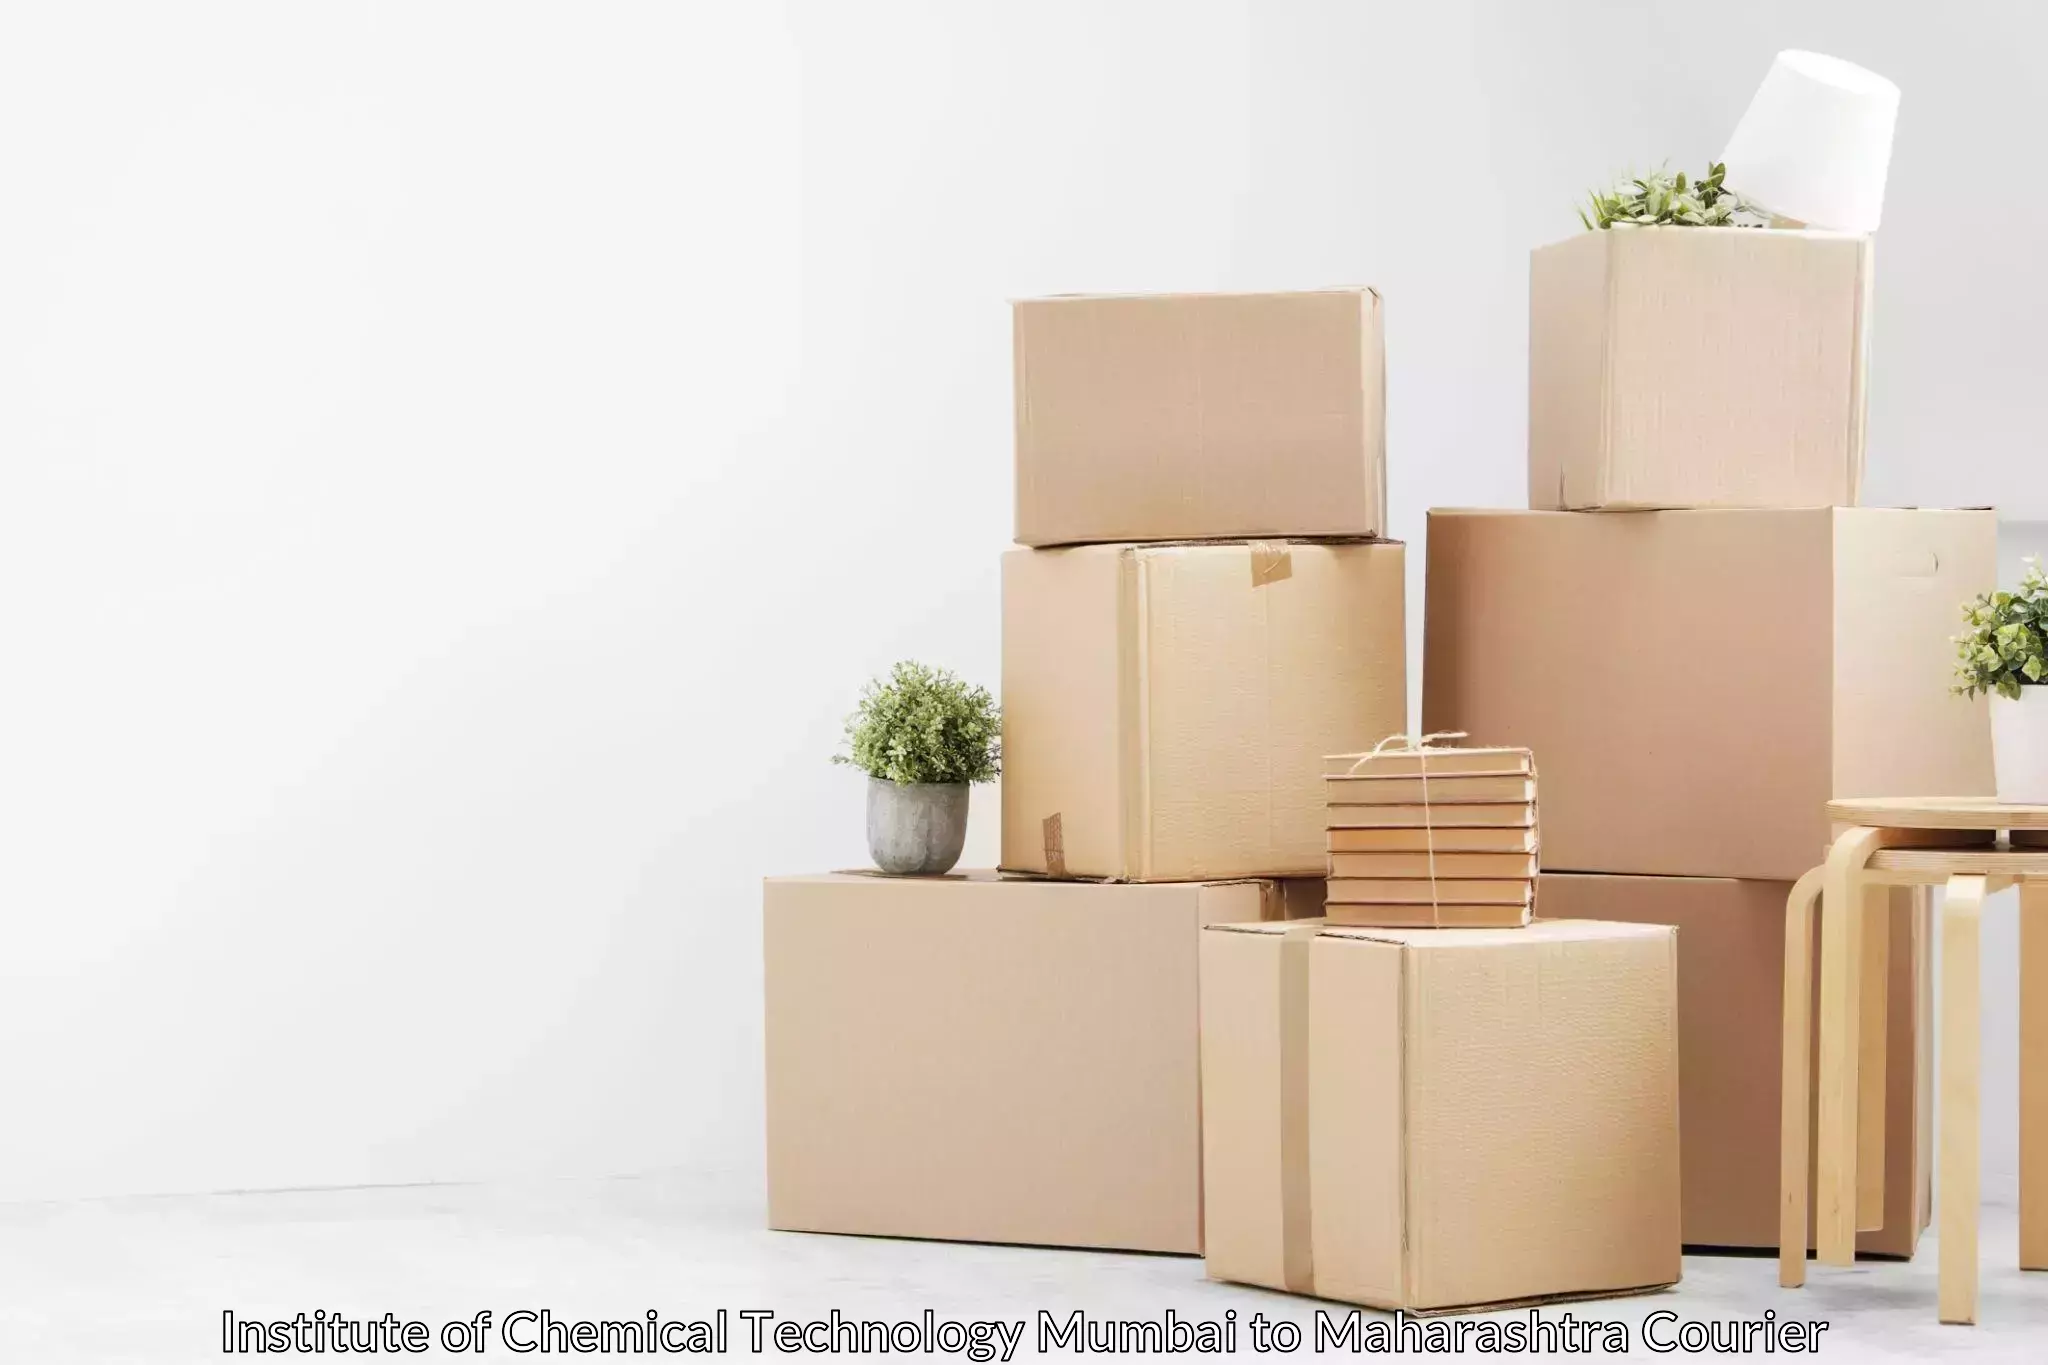 Advanced moving solutions Institute of Chemical Technology Mumbai to DY Patil Vidyapeeth Mumbai